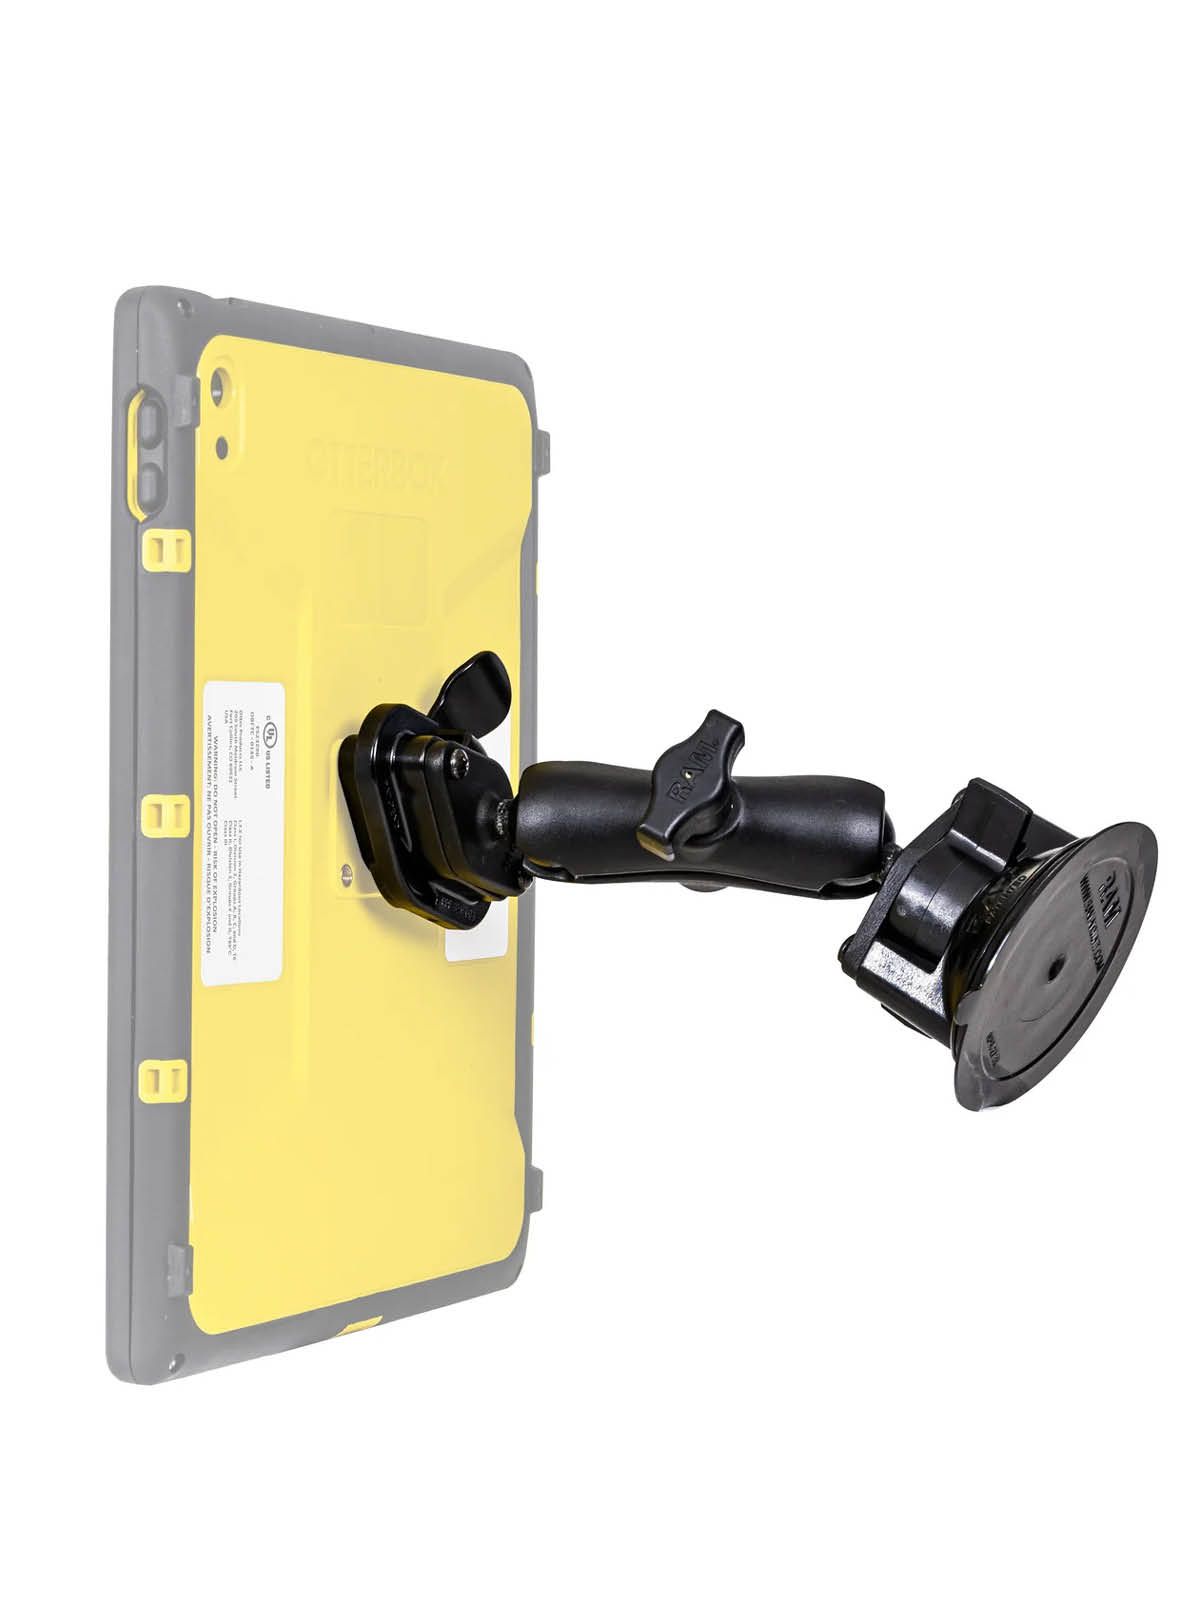 RAM Mounts Twist-Lock™ Suction Cup Mount with EZY-Mount™ Quick Release Adapter